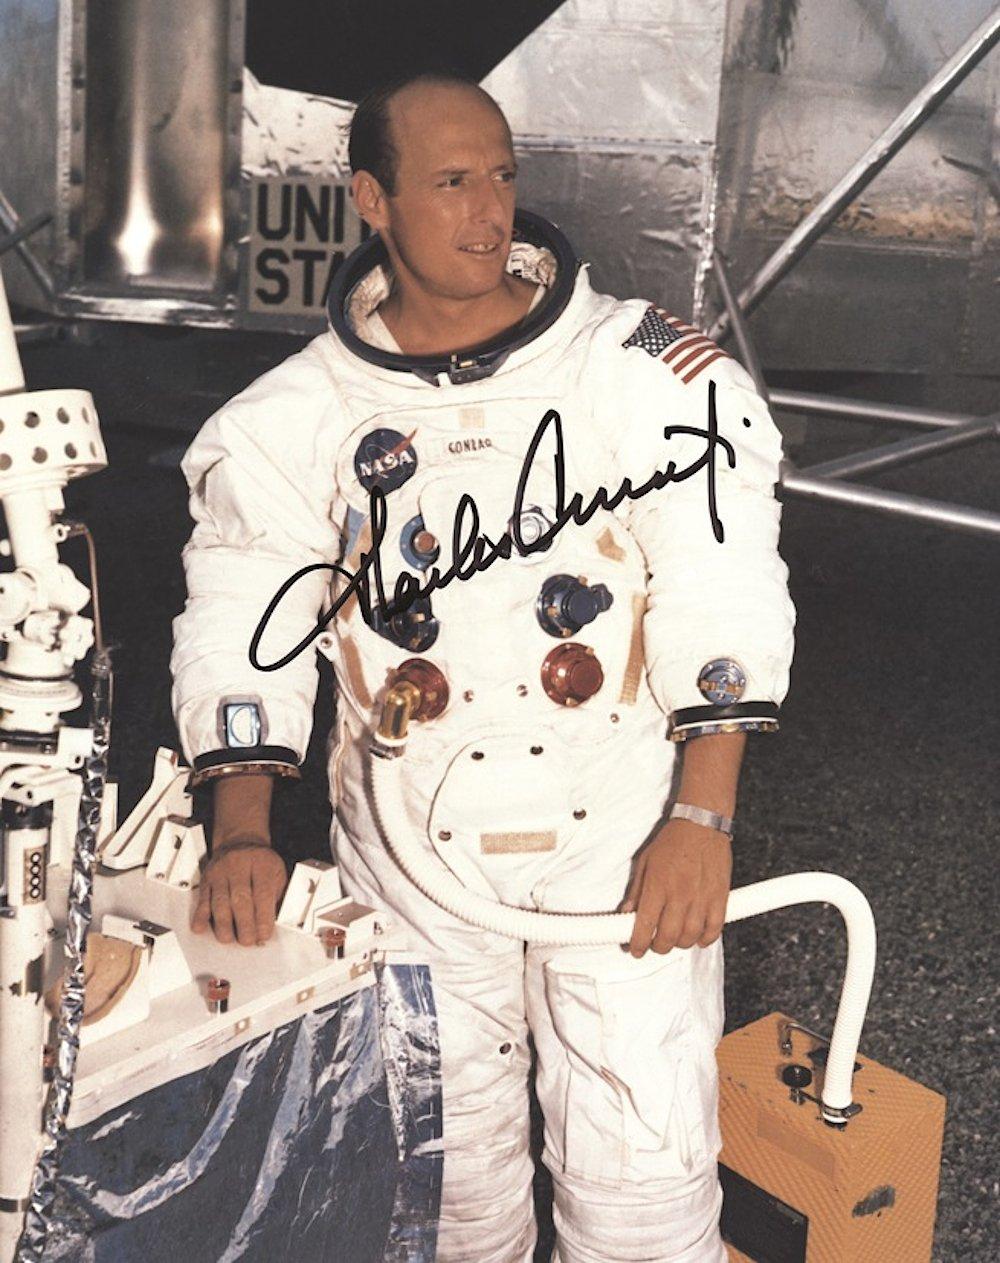 Mid-20th Century Pete Conrad Signed Photograph with Certificate of Authenticity